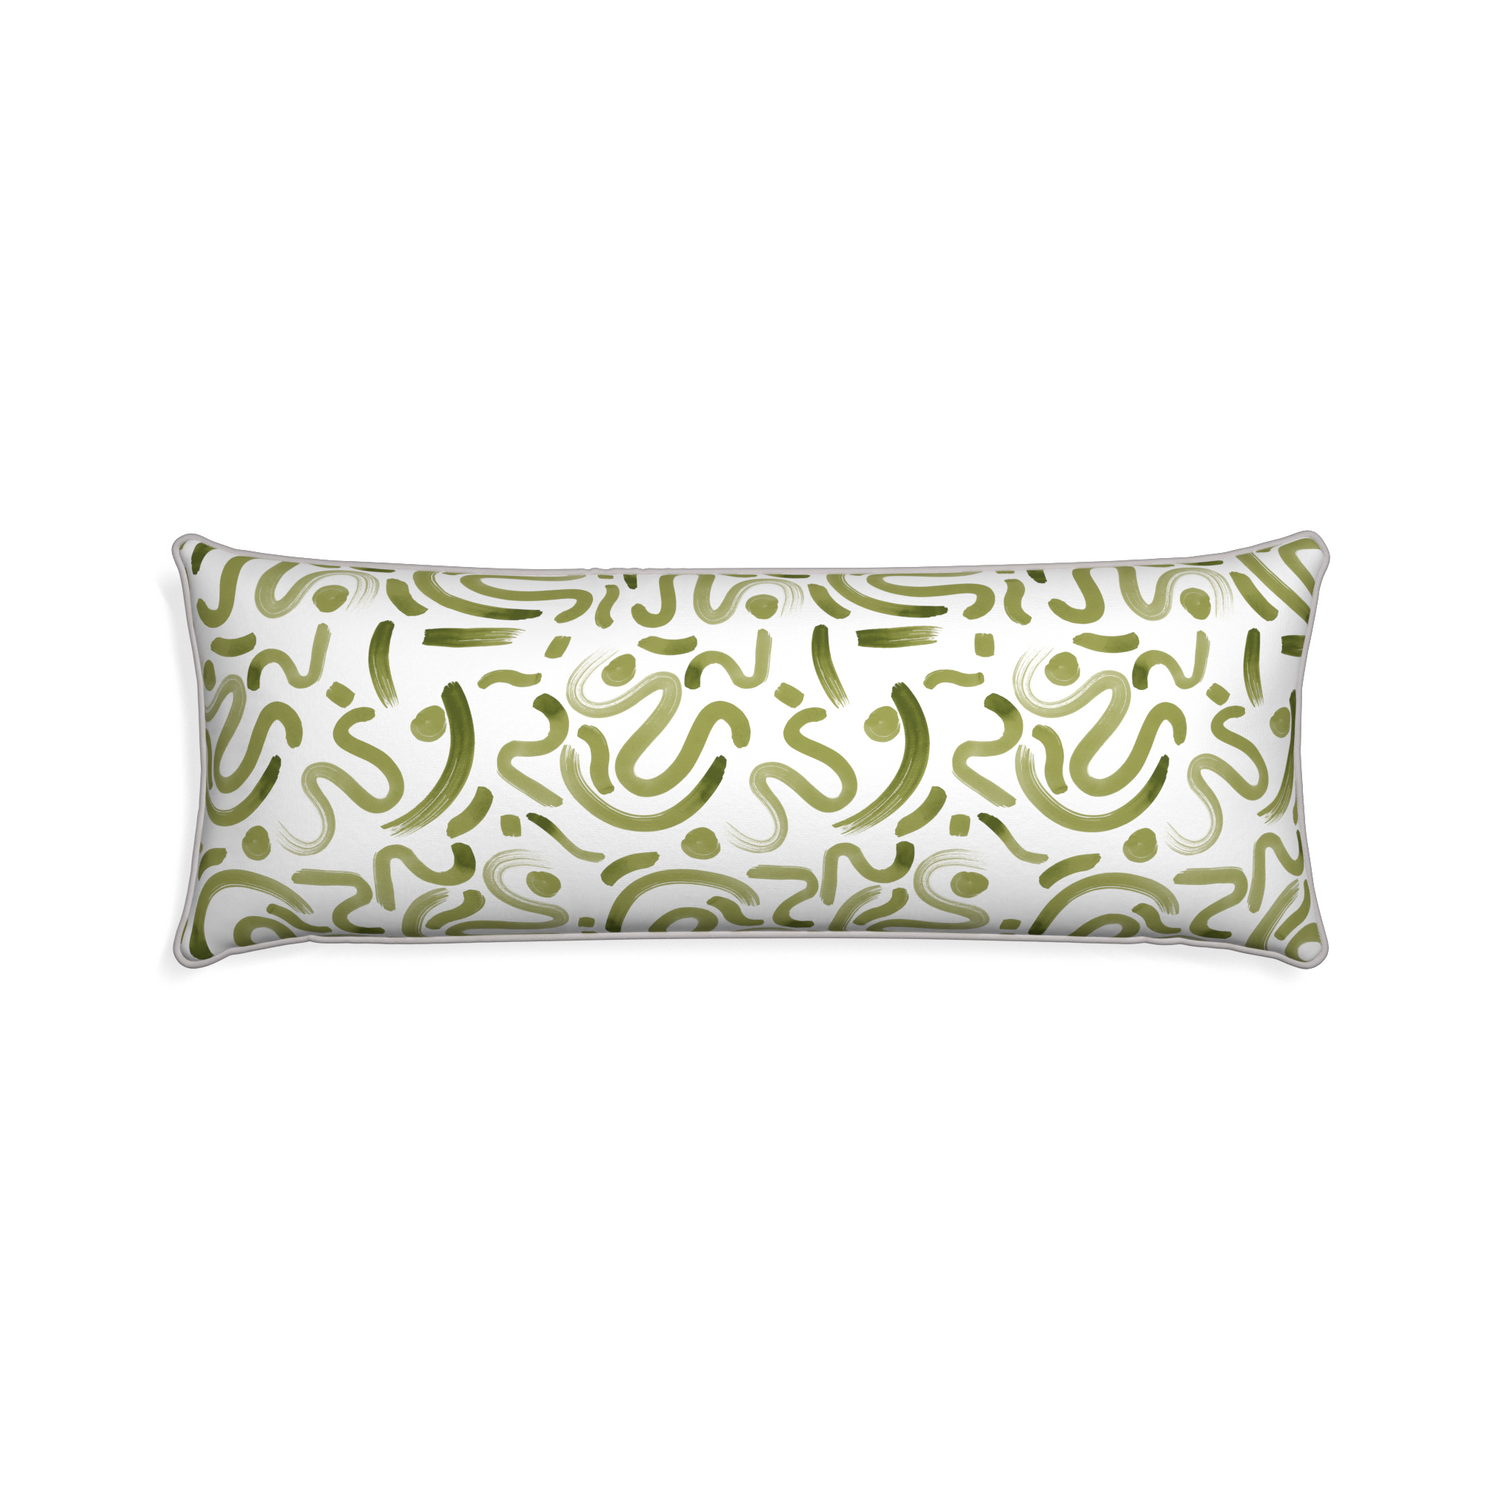 Xl-lumbar hockney moss custom pillow with pebble piping on white background